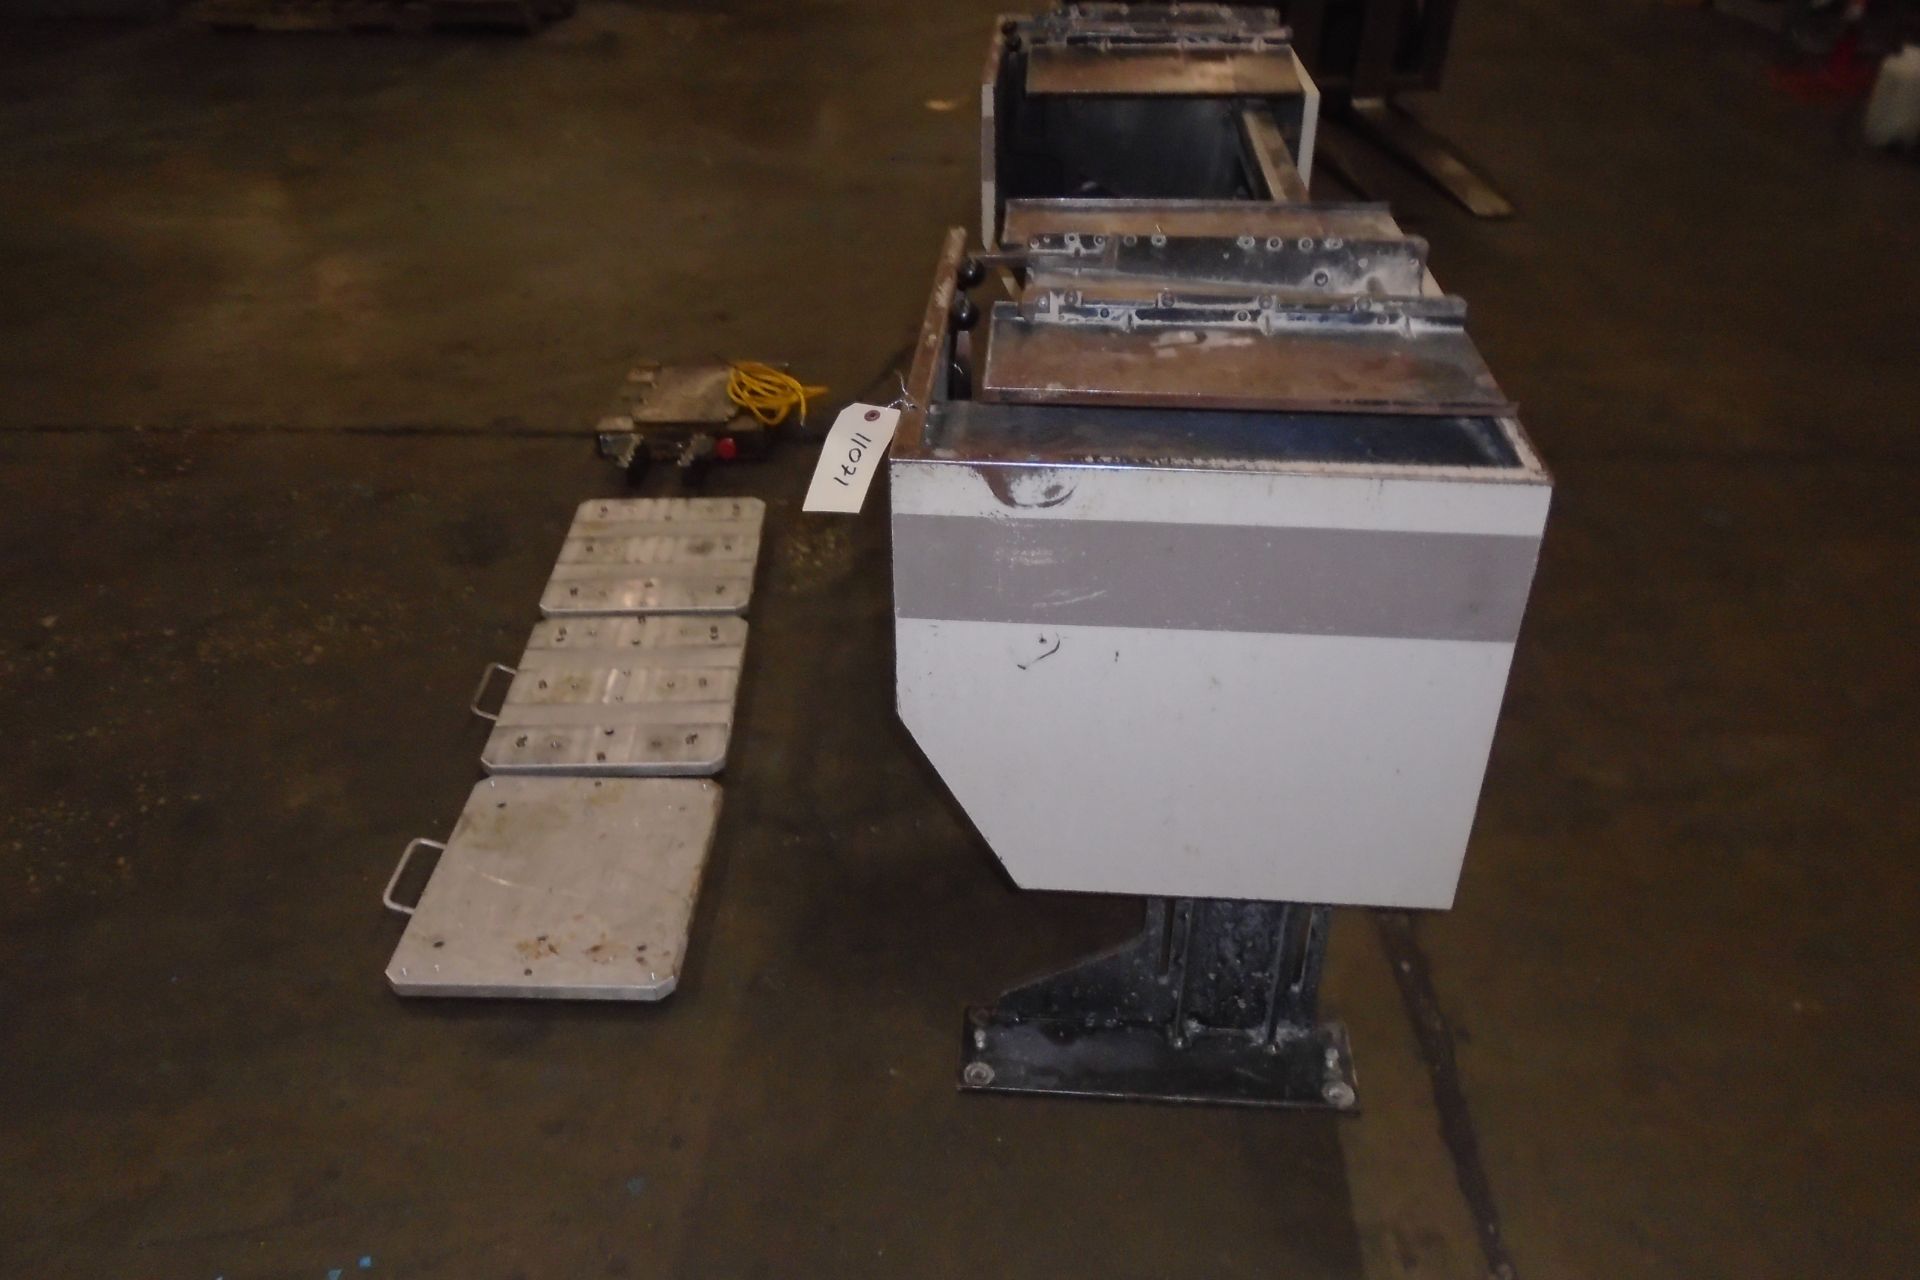 Midaco Series 20 Pallet Changer With 3 Pallets & Receiver Pallets 16” x 14” 3 Pcs. Receiver 14” x - Image 3 of 7